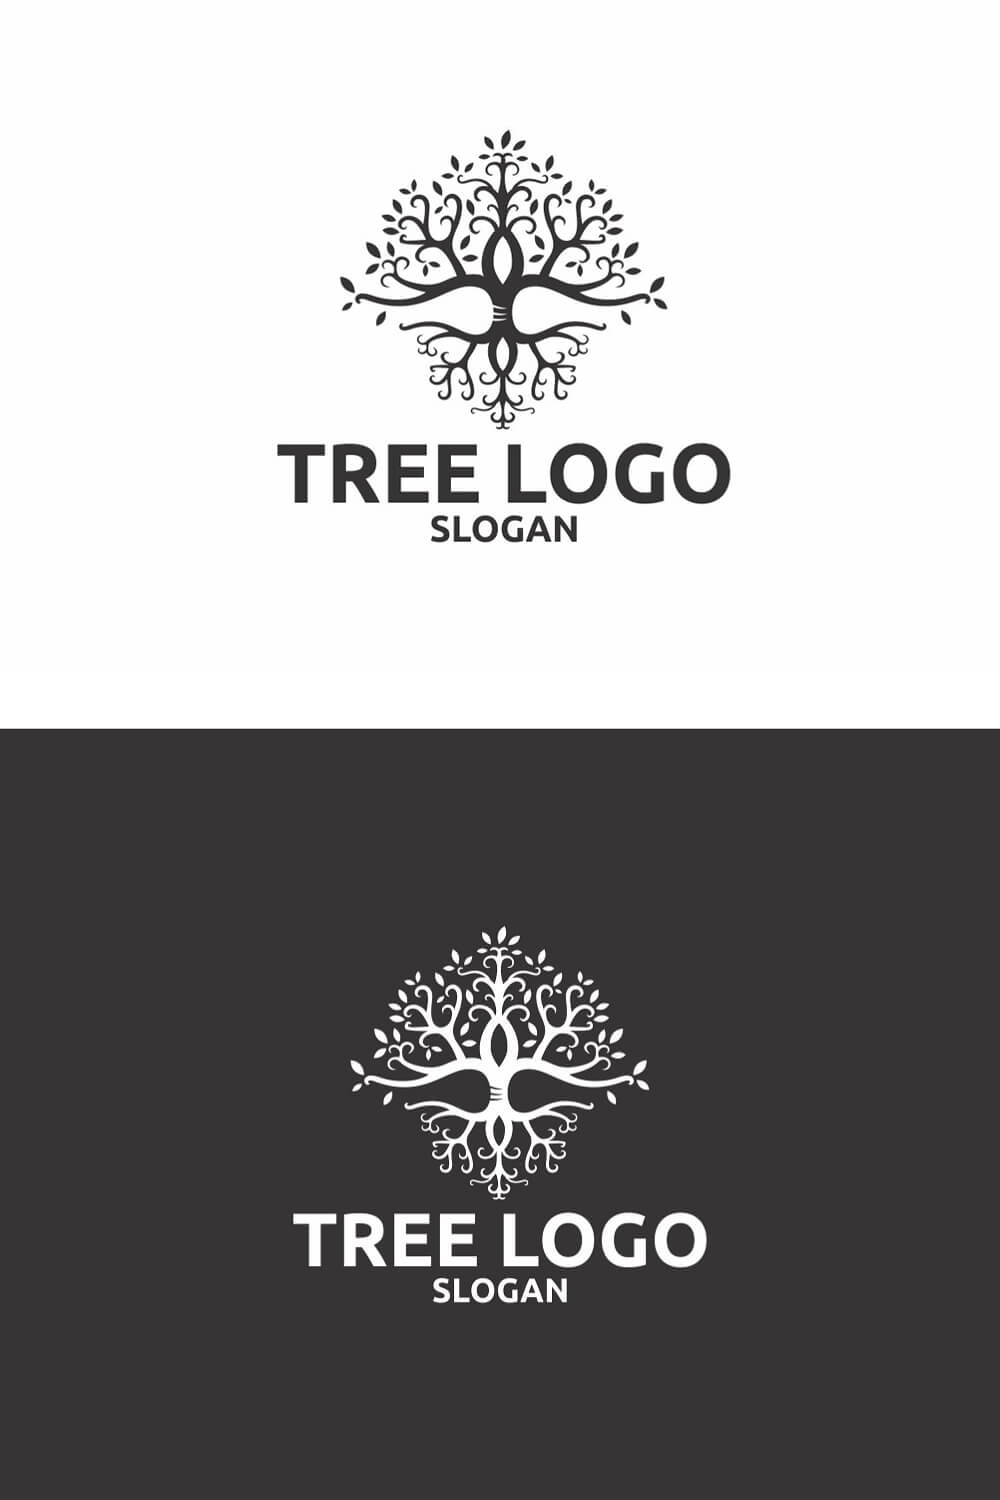 Two logos of ornate tree silhouettes as yin and yang, black and white.